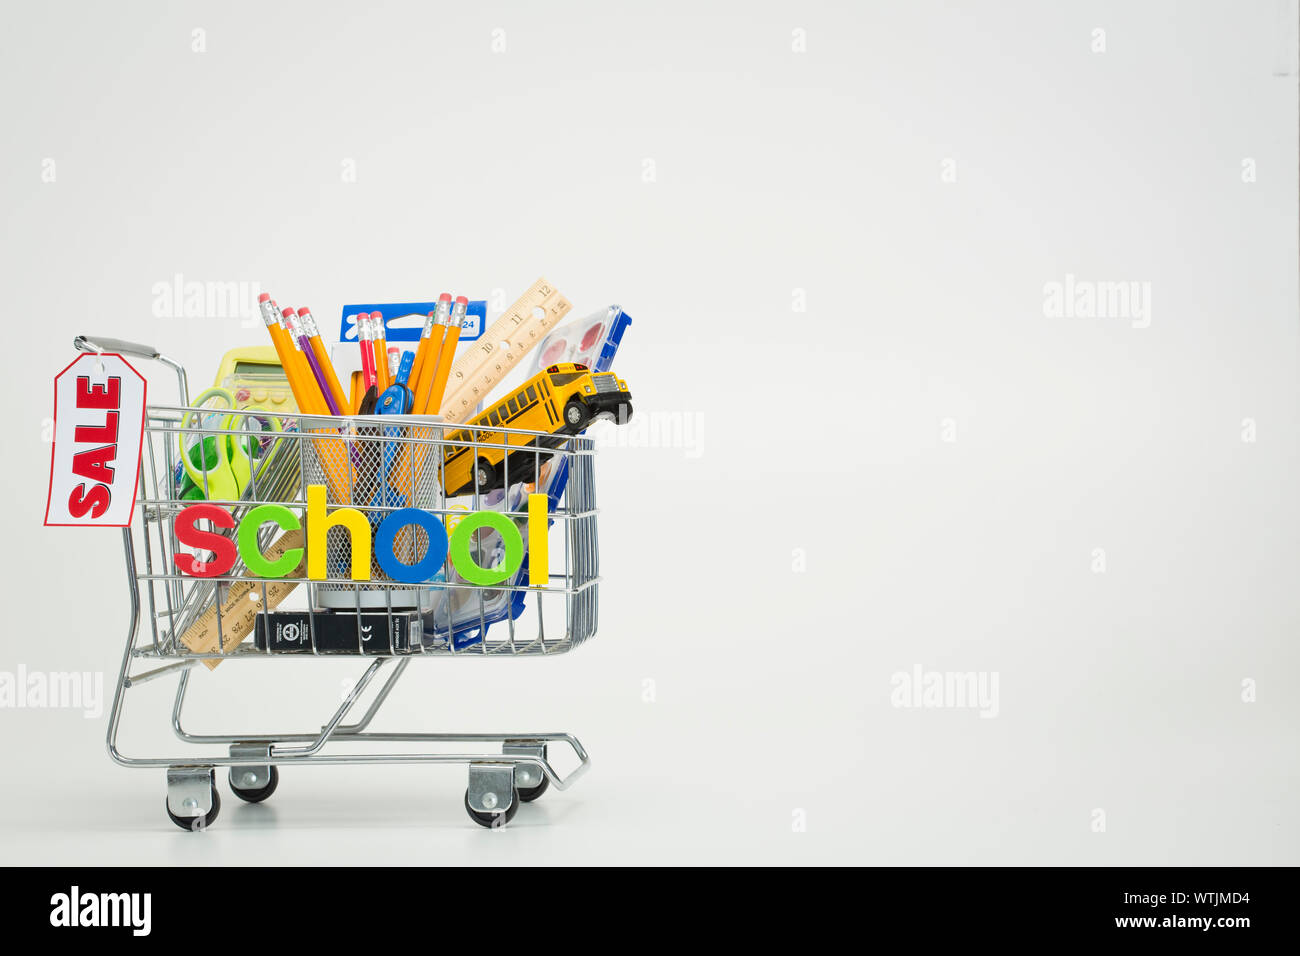 Premium Photo  Shopping carts with school supplies isolated on a